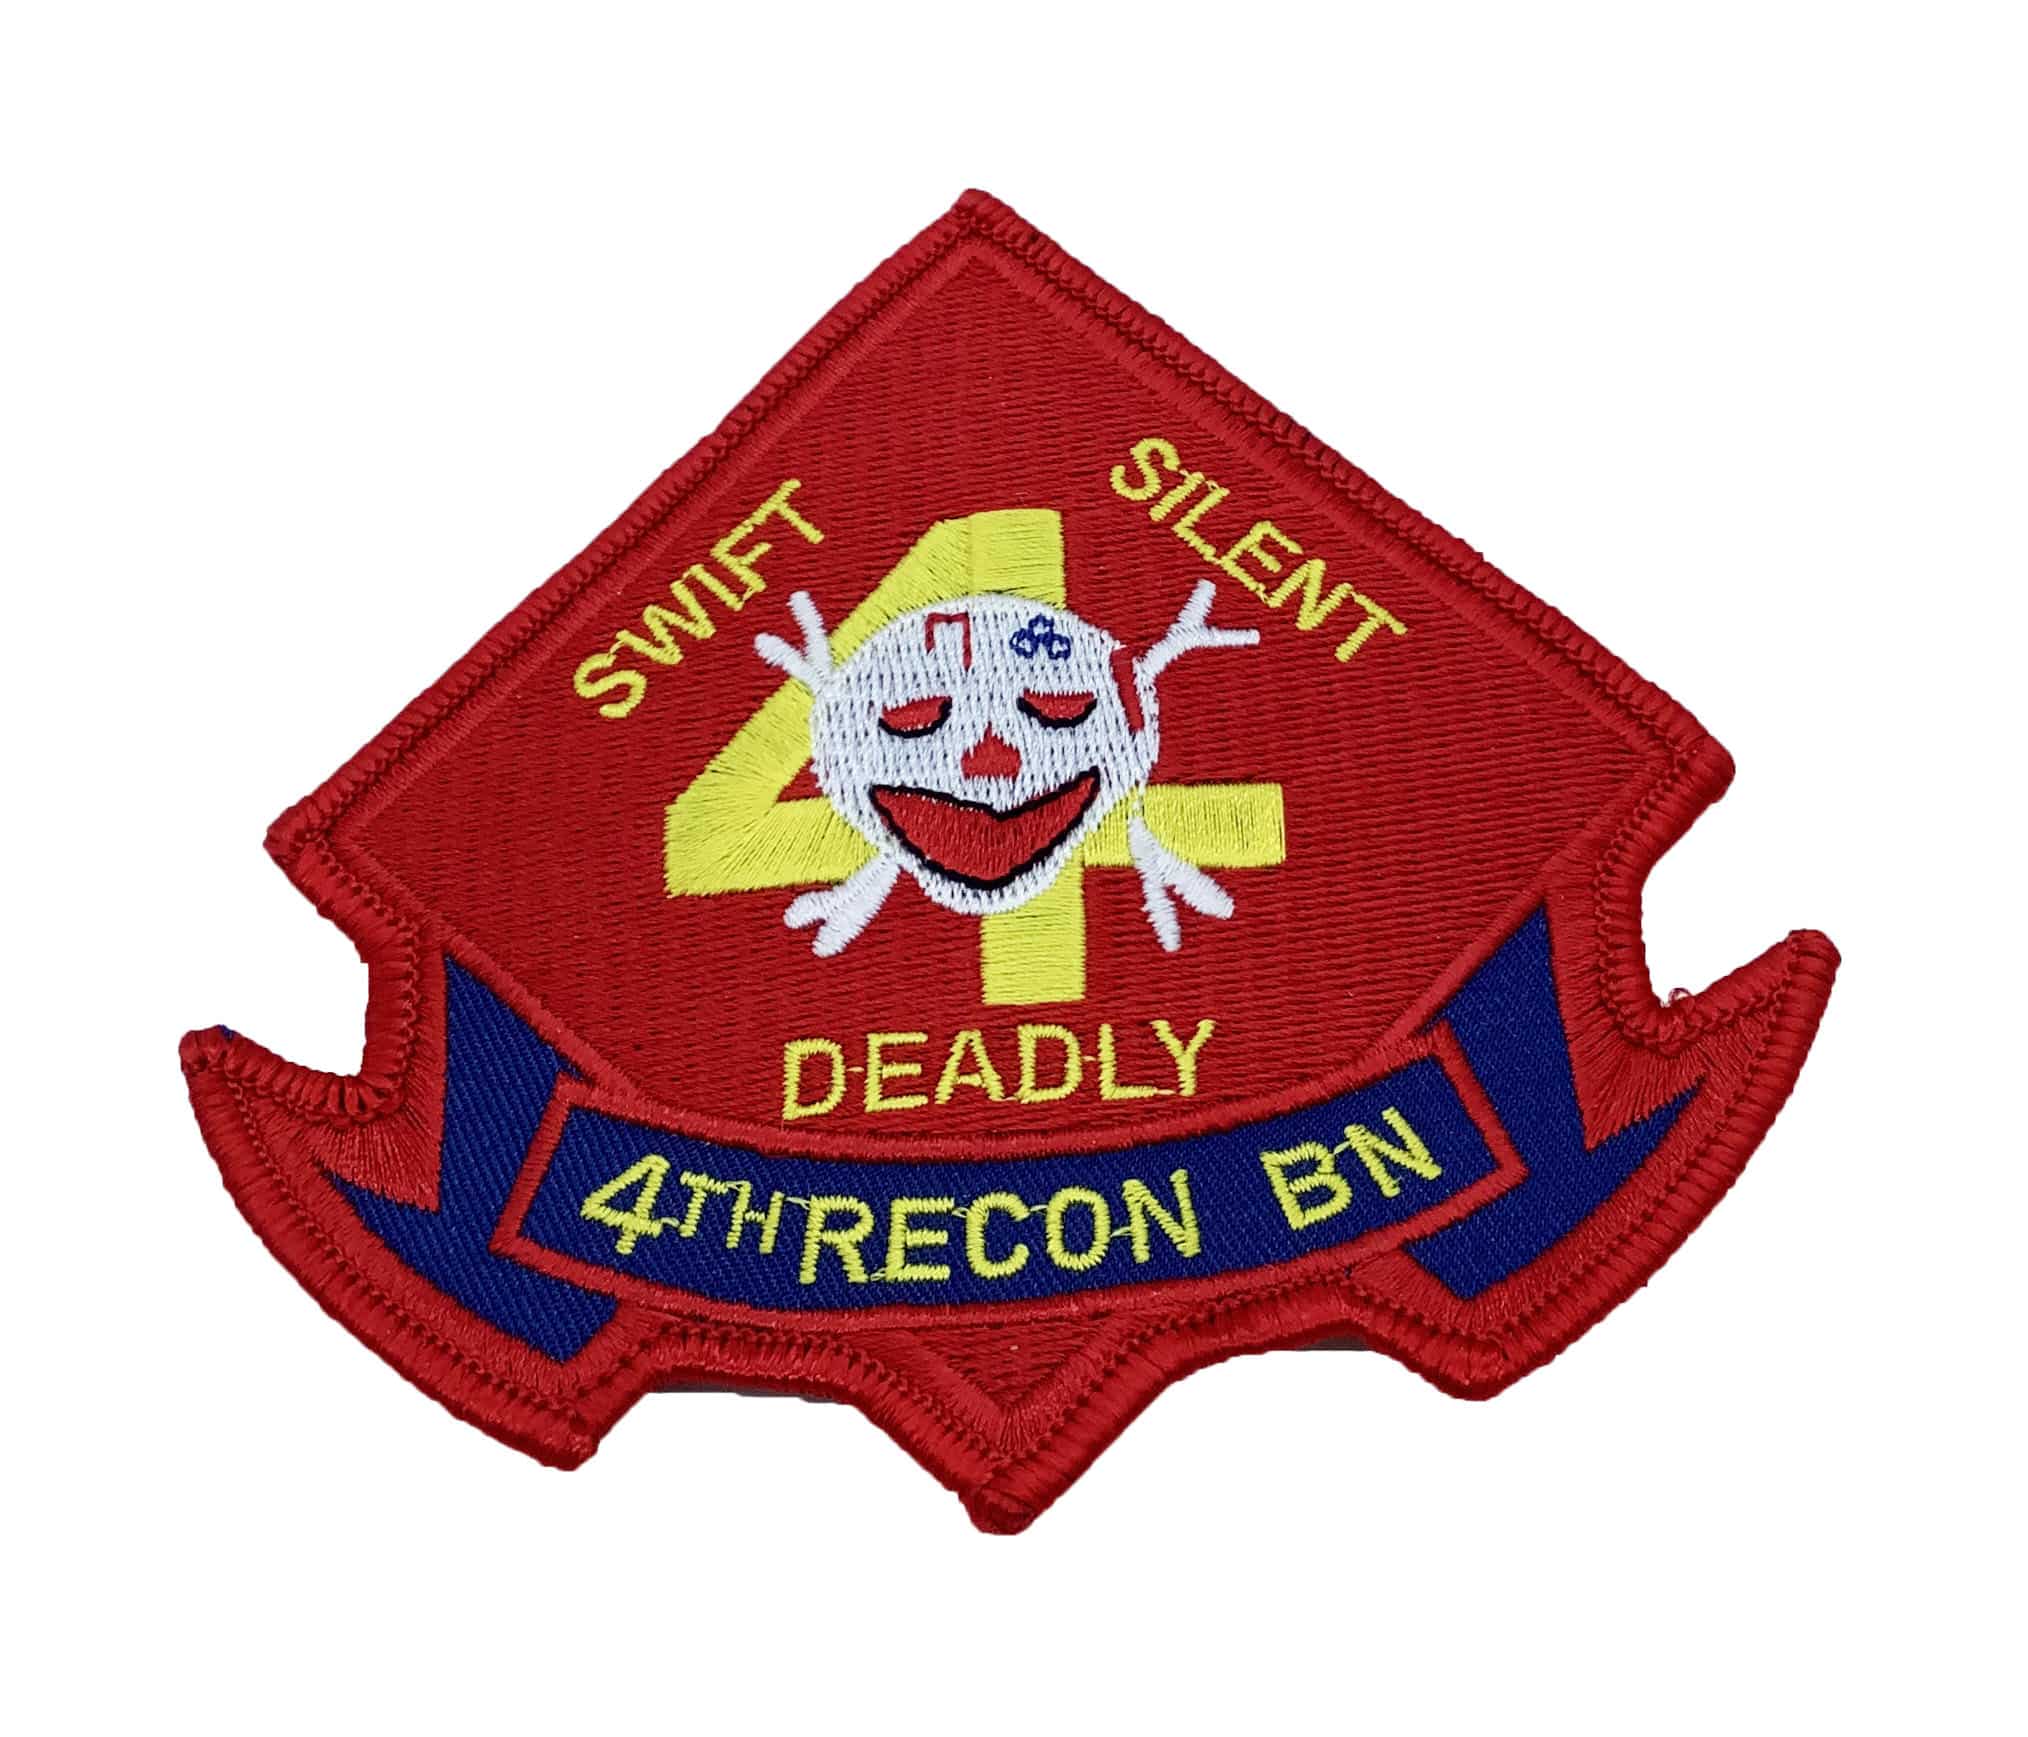 4th Recon Bn Marines Patch – No Hook and Loop